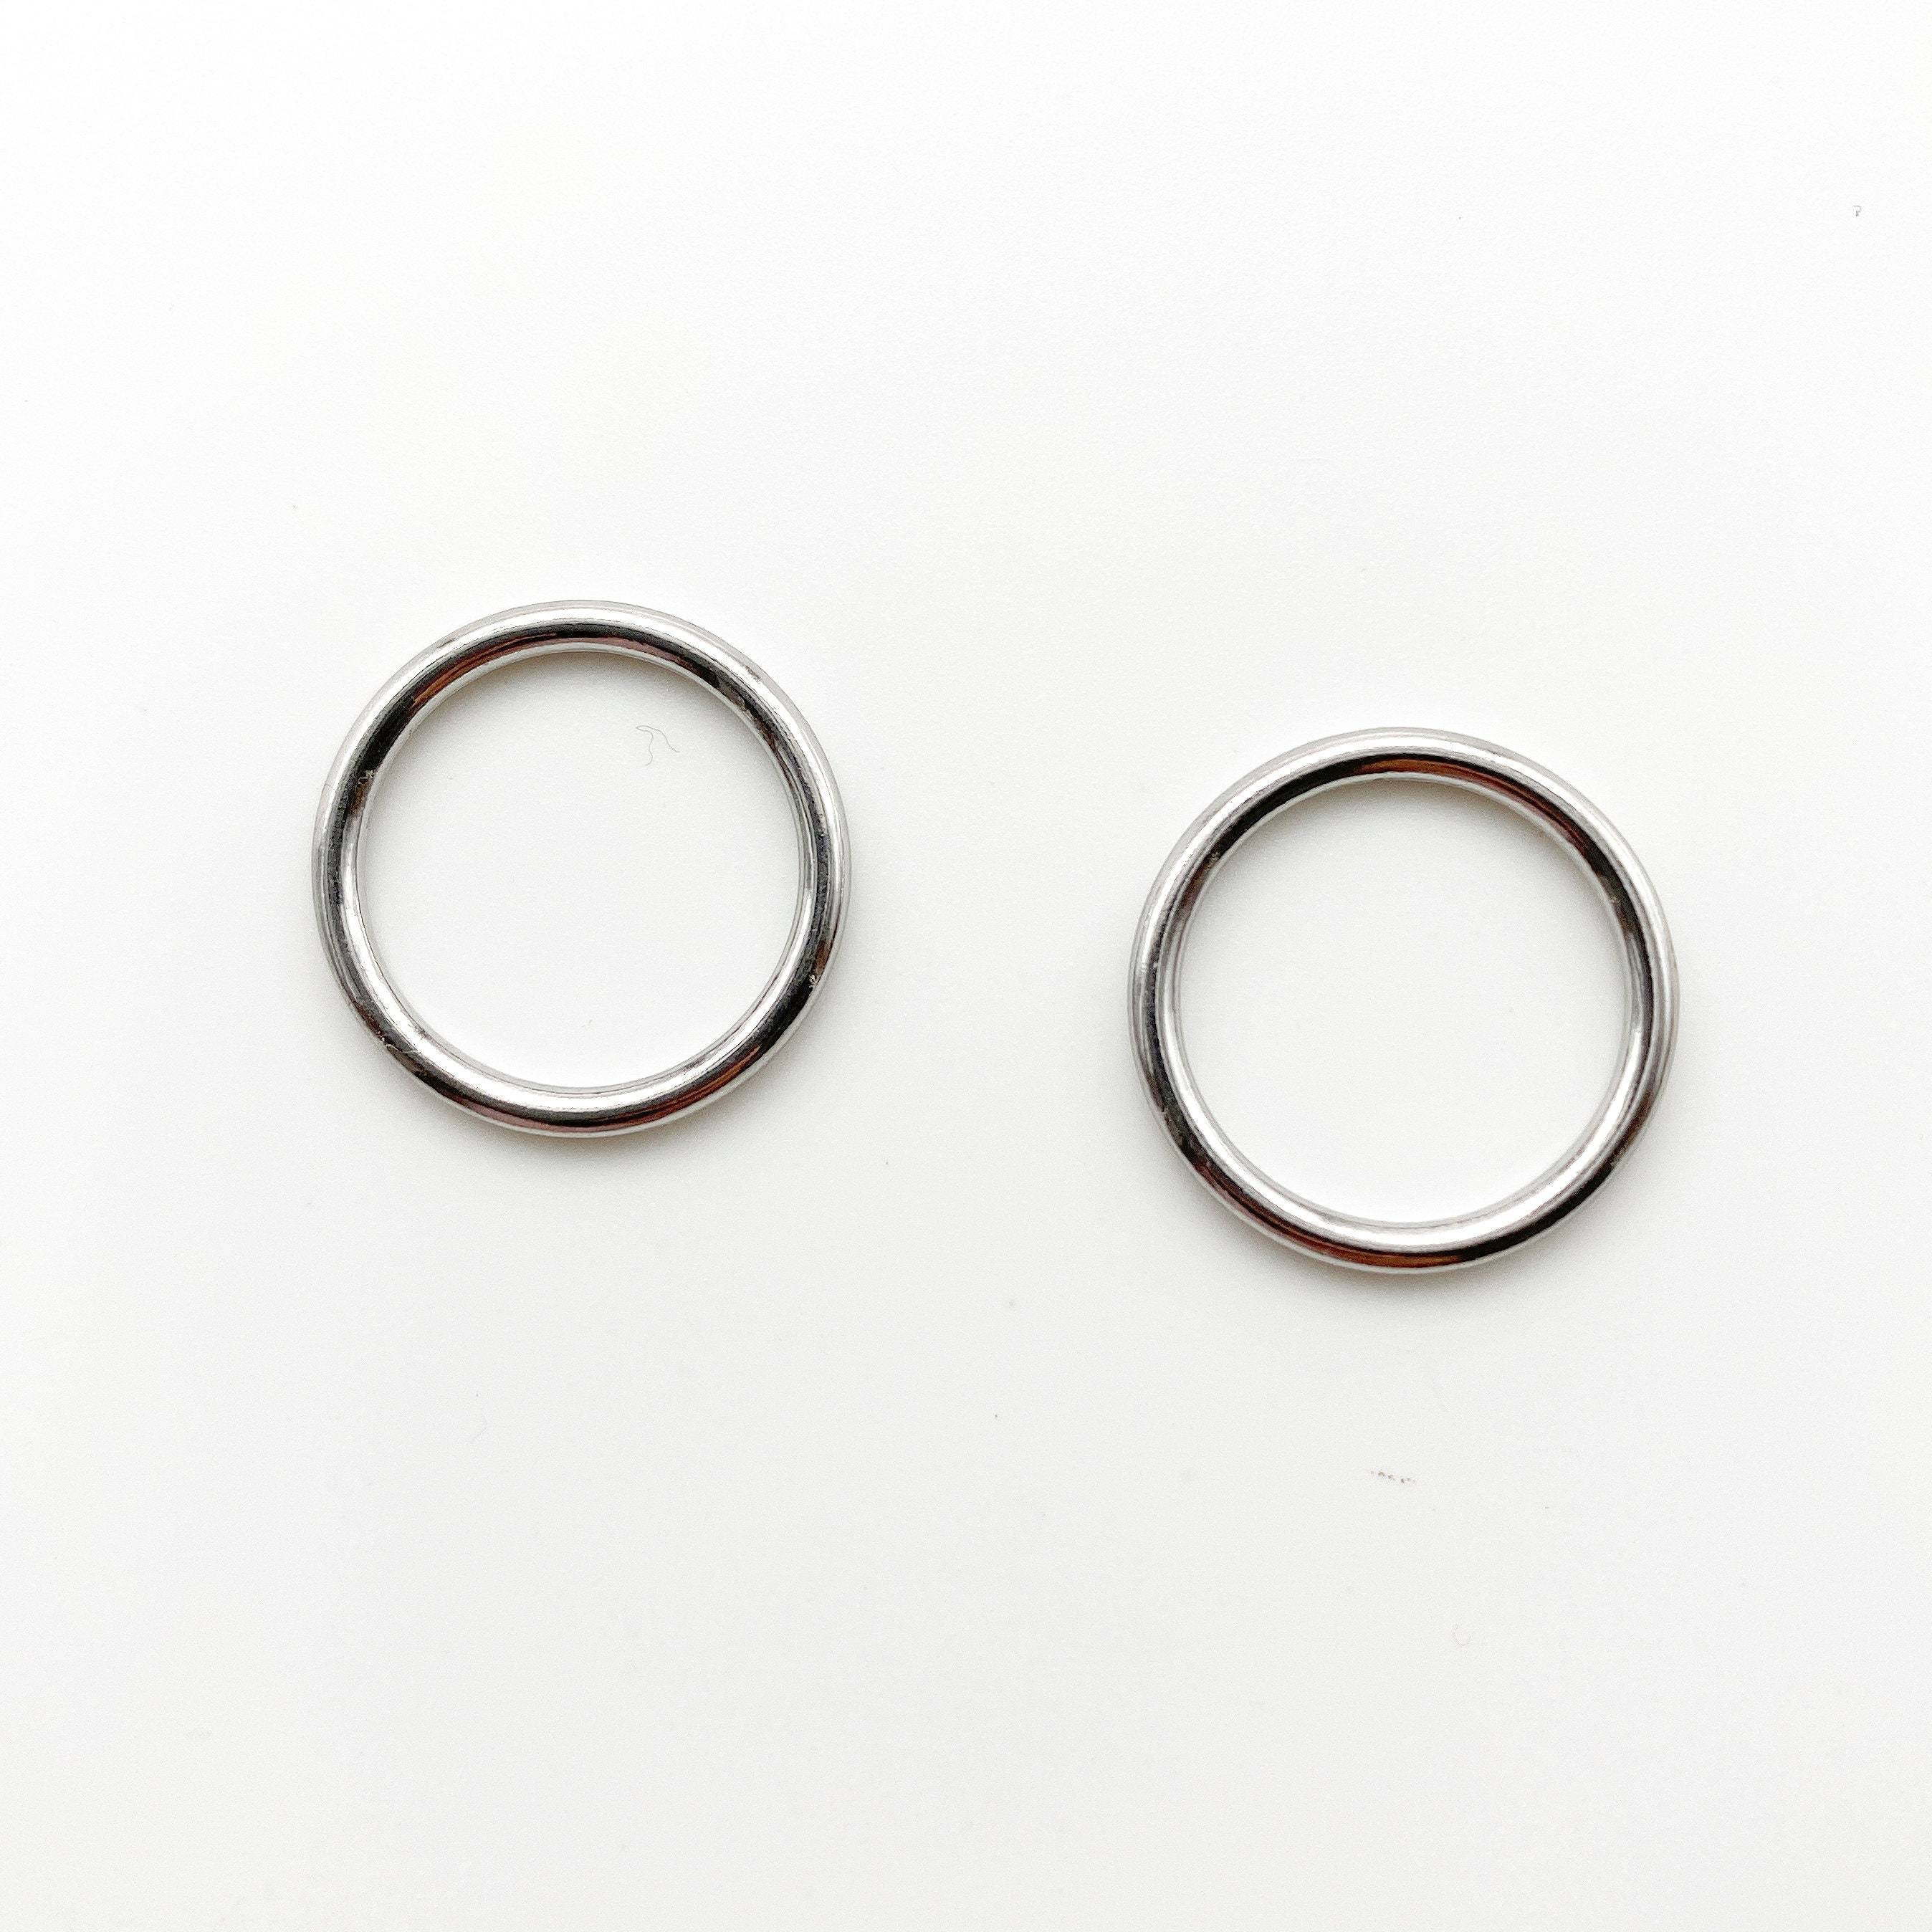 Set of 2 Thicker Rings OR 2 Tall Thick Sliders in Silver for Swimwear or Bra making- 3/8"/10mm, 1/2"/12mm, 5/8"/15mm-Stitch Love Studio